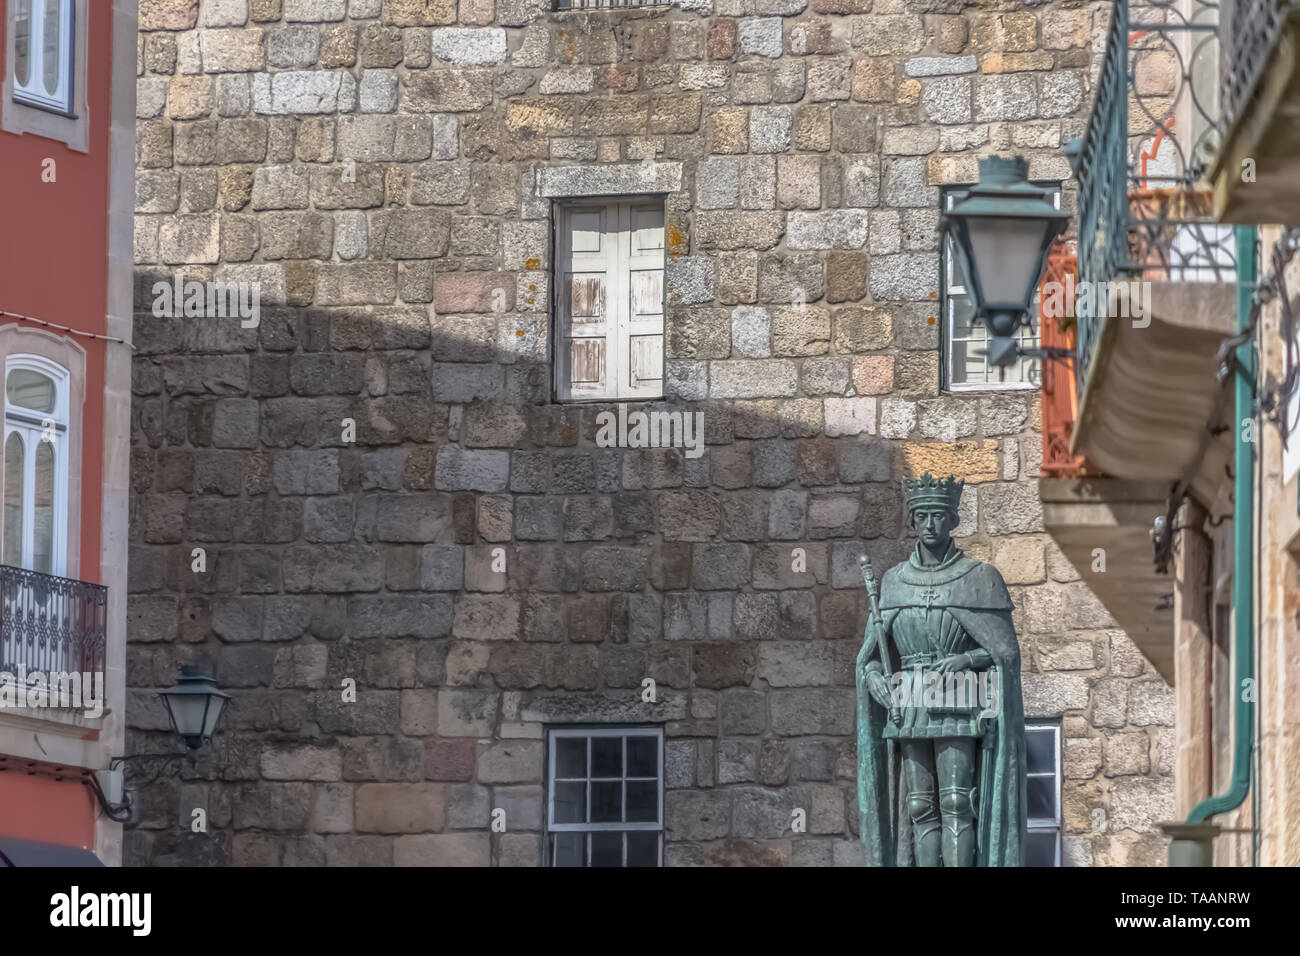 Viseu / Portugal - 04 16 2019 : Detailed view at the lateral facade of the Cathedral of Viseu, Sé Cathedral de Viseu, D. Duarte statue, architectural  Stock Photo